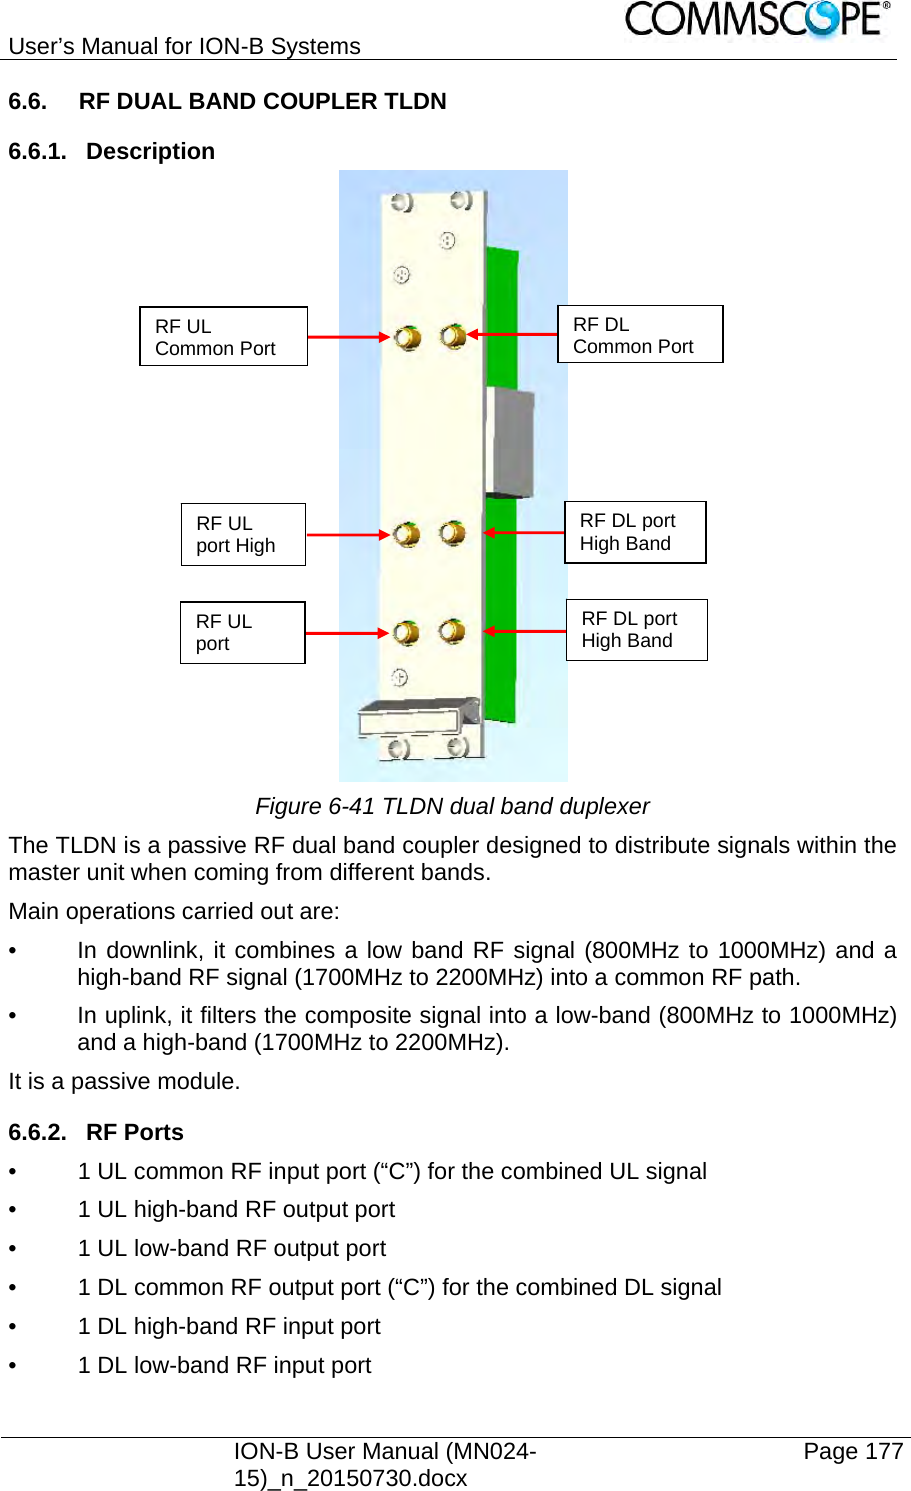 User’s Manual for ION-B Systems    ION-B User Manual (MN024-15)_n_20150730.docx  Page 177 6.6.  RF DUAL BAND COUPLER TLDN 6.6.1. Description  Figure 6-41 TLDN dual band duplexer The TLDN is a passive RF dual band coupler designed to distribute signals within the master unit when coming from different bands. Main operations carried out are: •  In downlink, it combines a low band RF signal (800MHz to 1000MHz) and a high-band RF signal (1700MHz to 2200MHz) into a common RF path.  •  In uplink, it filters the composite signal into a low-band (800MHz to 1000MHz) and a high-band (1700MHz to 2200MHz). It is a passive module. 6.6.2. RF Ports •  1 UL common RF input port (“C”) for the combined UL signal •  1 UL high-band RF output port •  1 UL low-band RF output port •  1 DL common RF output port (“C”) for the combined DL signal •  1 DL high-band RF input port •  1 DL low-band RF input port RF UL port High RF DL port High Band RF UL Common Port RF DL Common PortRF UL port RF DL port High Band 